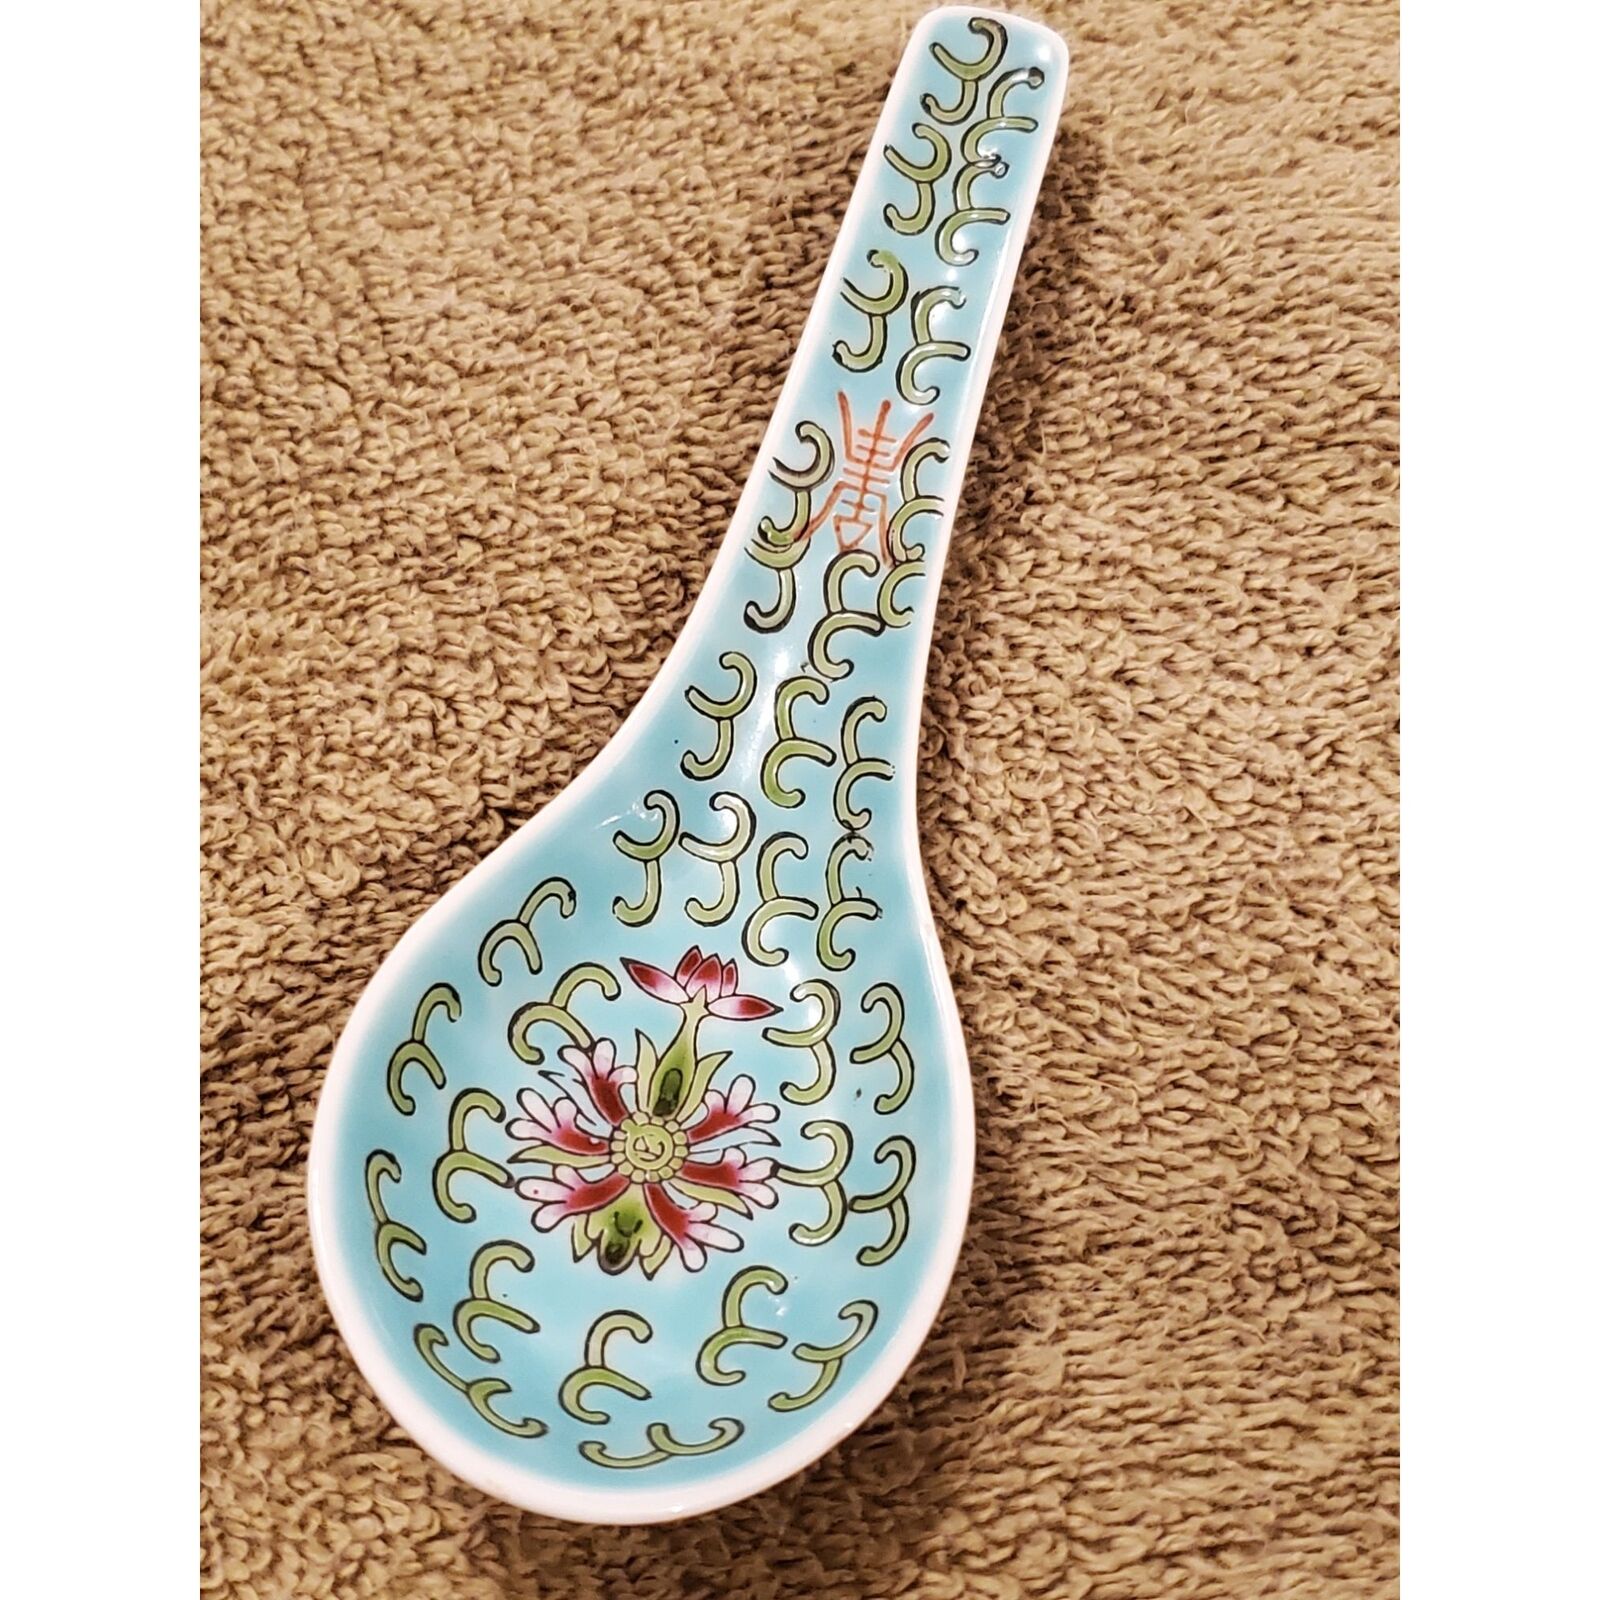 Vintage Chinese Porcelain Spoon With Floral Design & Green Swirls